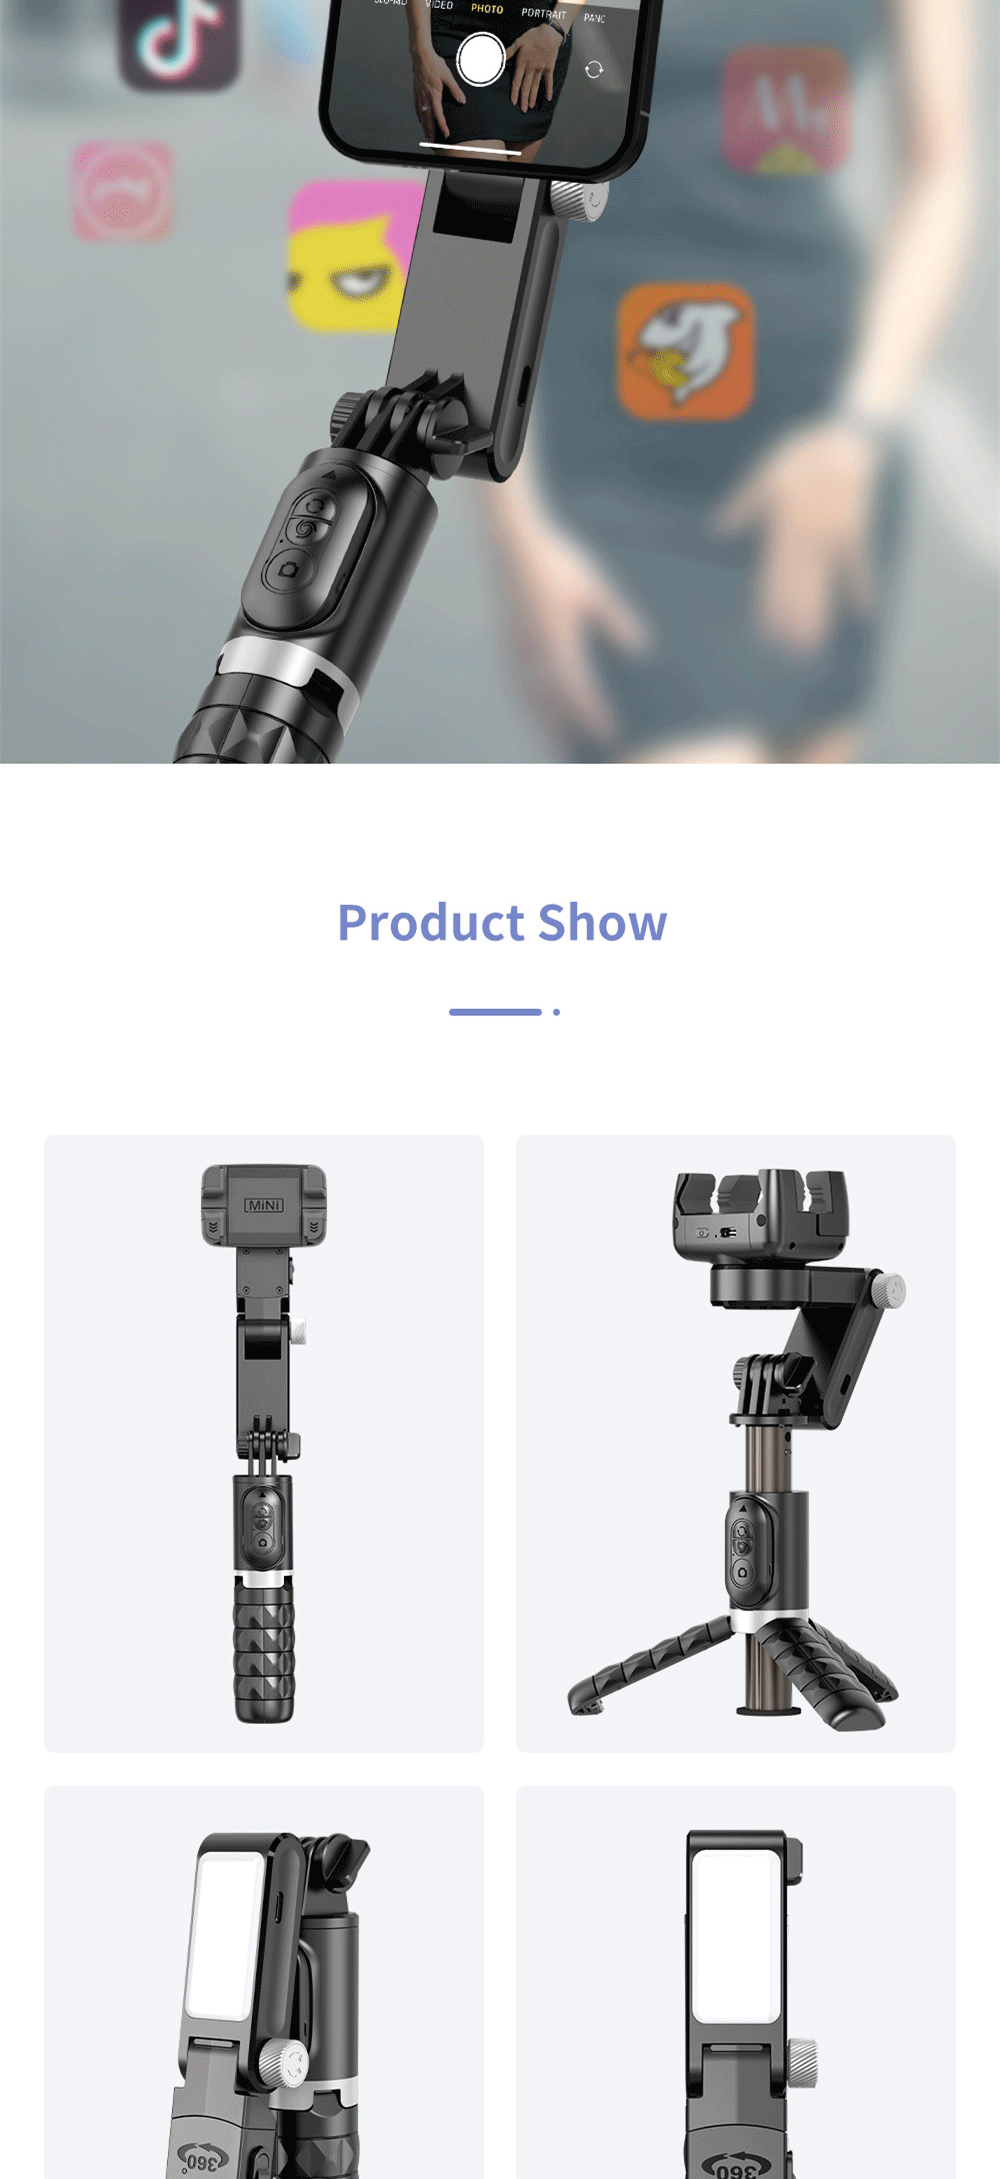 360 Rotation Auto-Tracking Shooting Mode. Gimbal Stabilizer Selfie Stick Tripod Smartphone Live Photography. For Content Creators/Bloggers For TikTok Instagram YouTube.